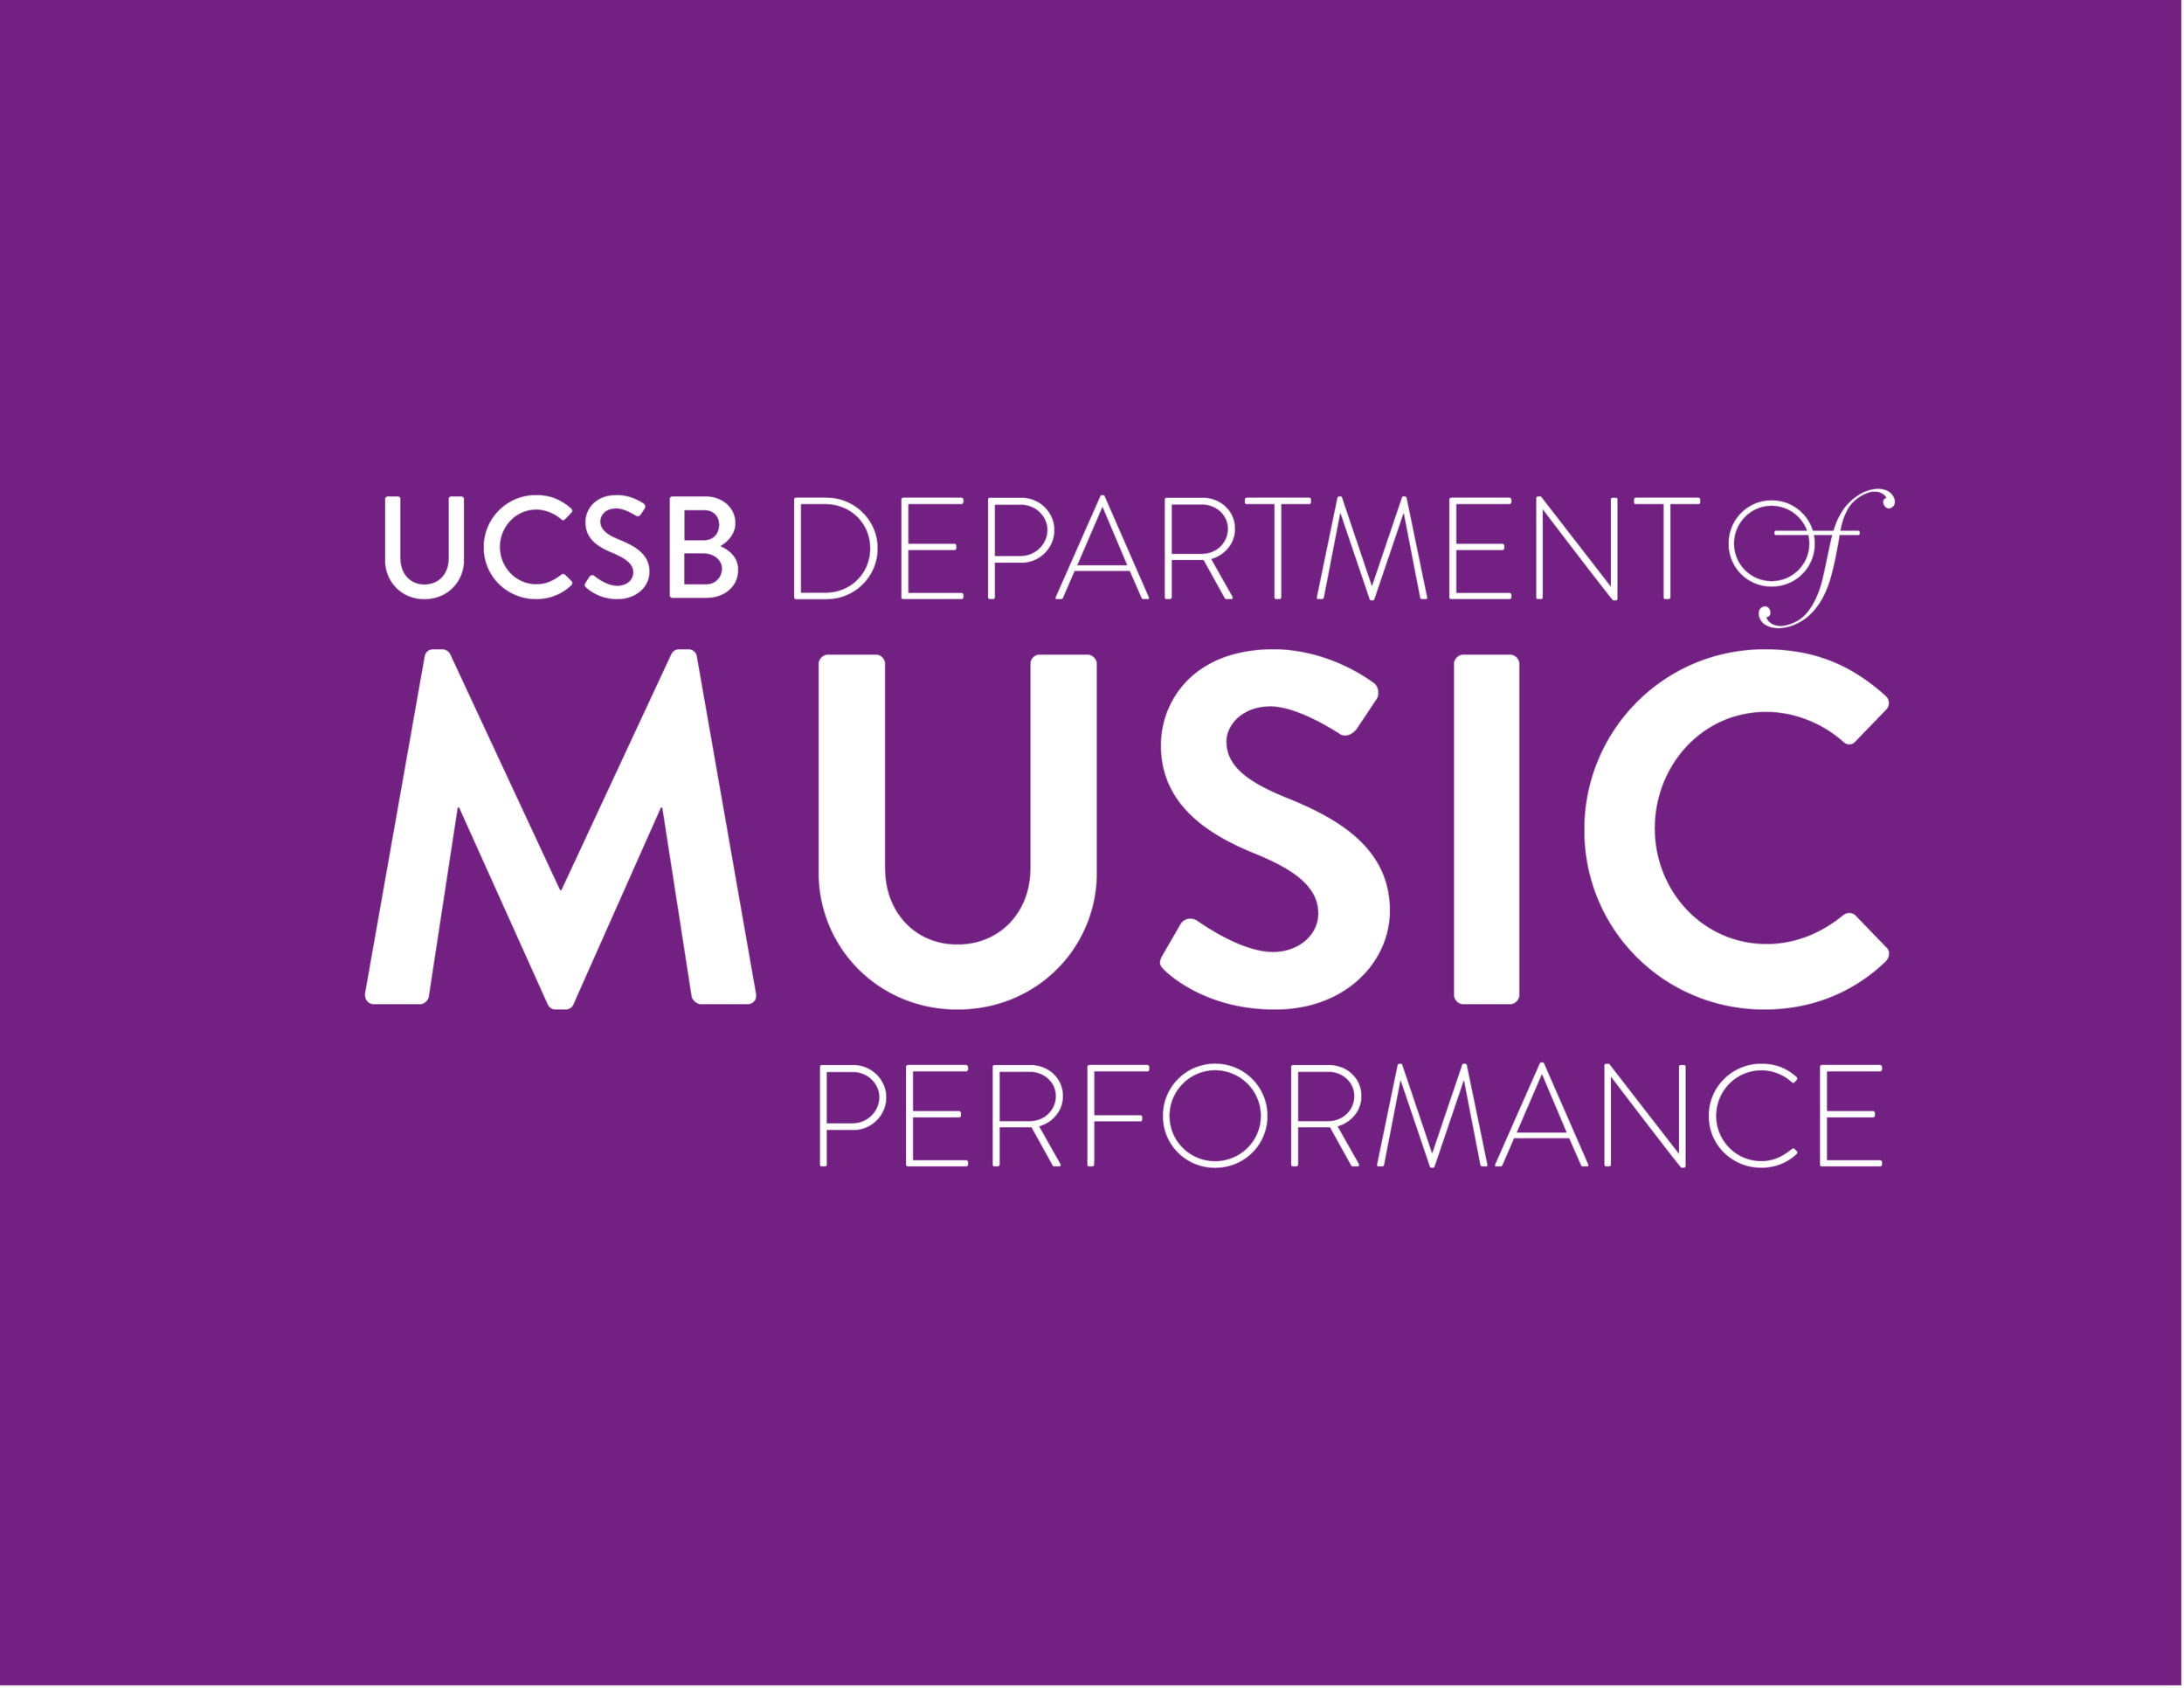 ucsb guidelines new logo and font use FINAL-22.png